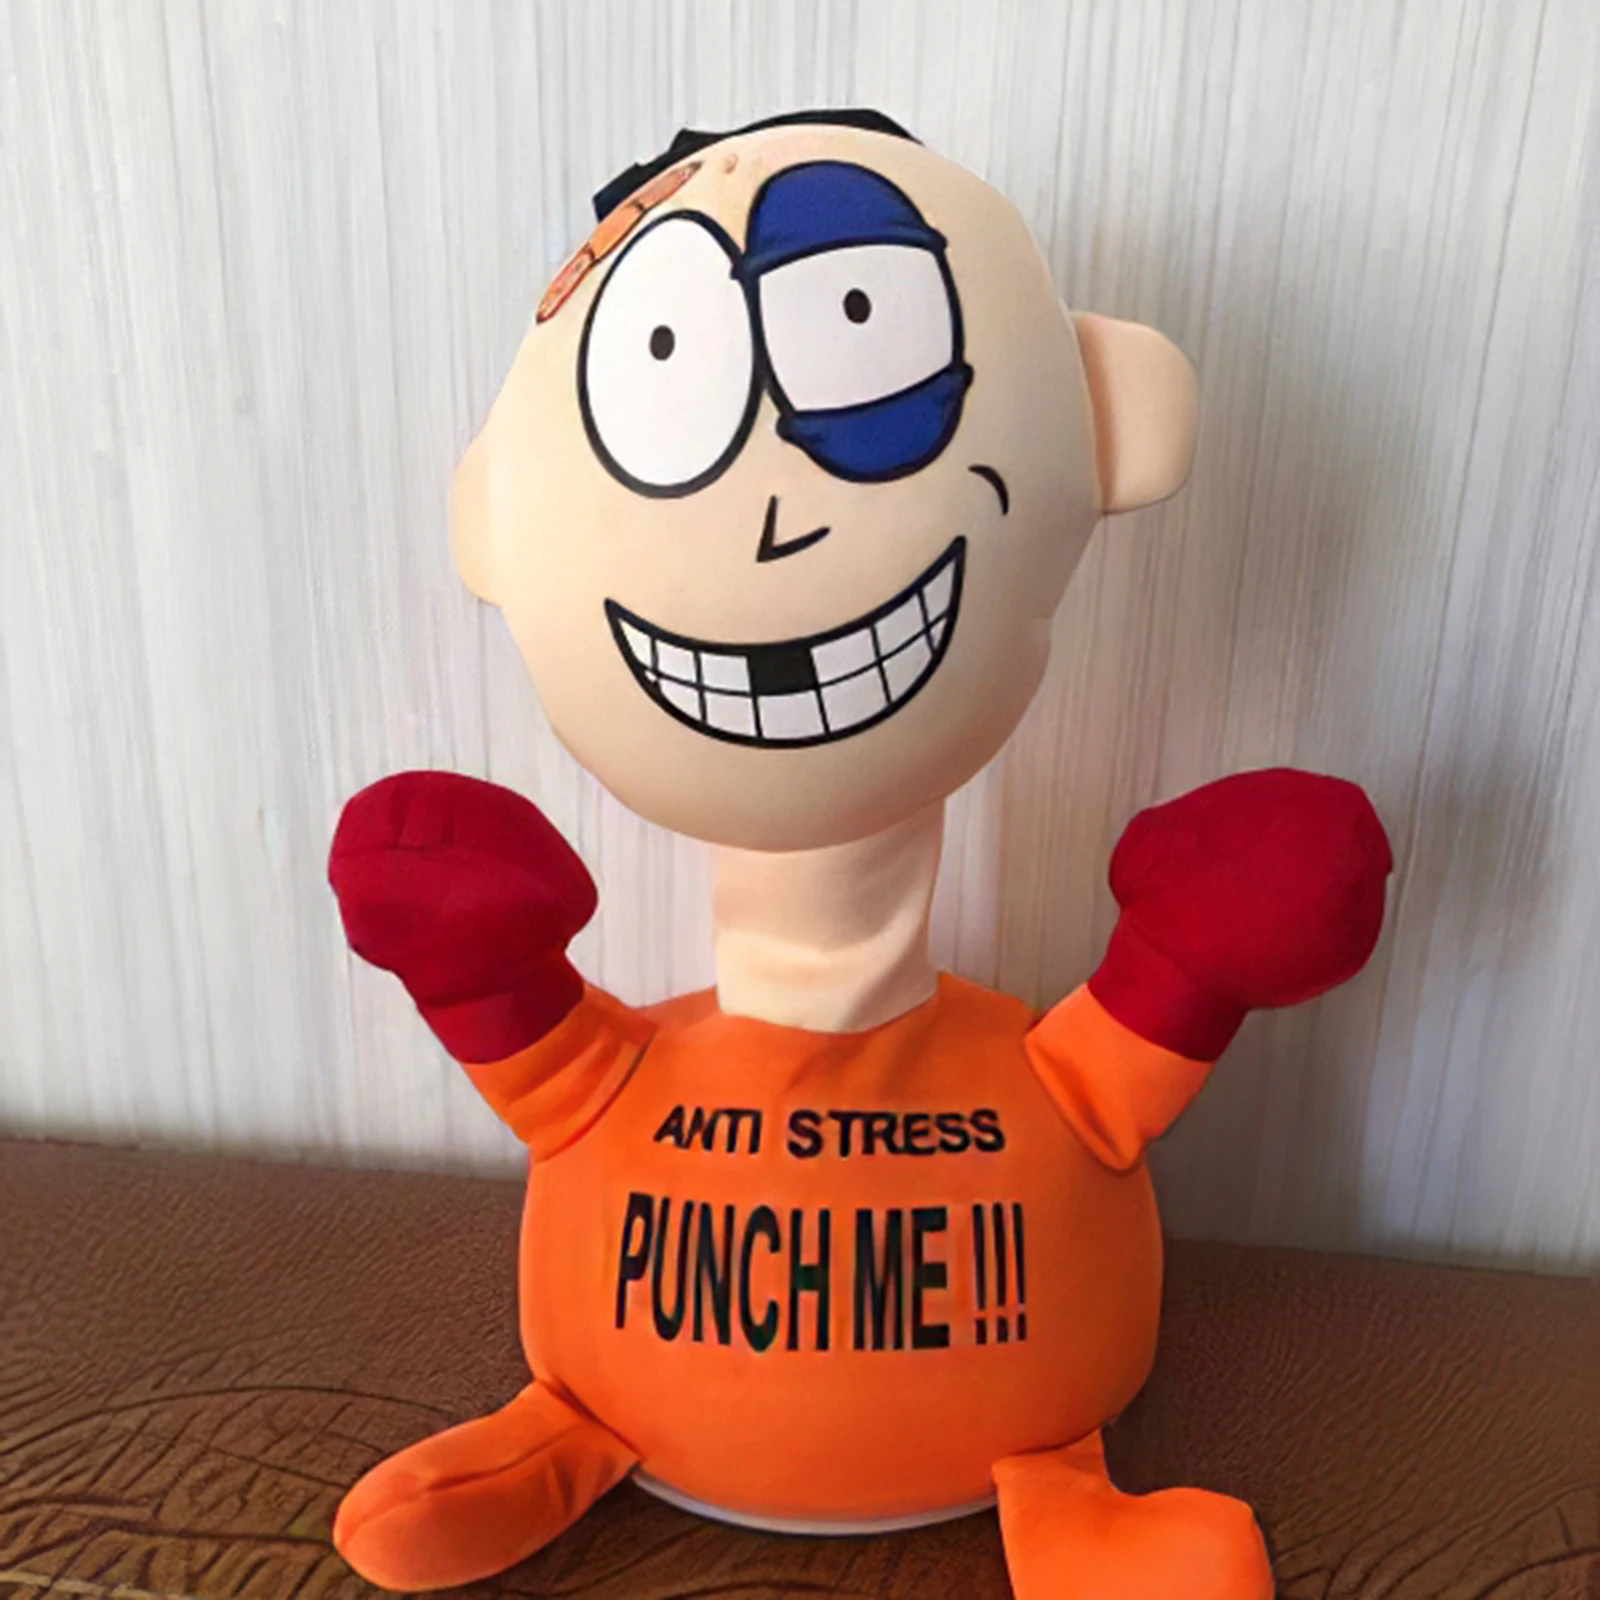 

Comfortable Touching Punch Electric Plush Vent Toy Me Doll Funny Emotional Vent Relieve Stress Anxiety Screaming Doll For Child